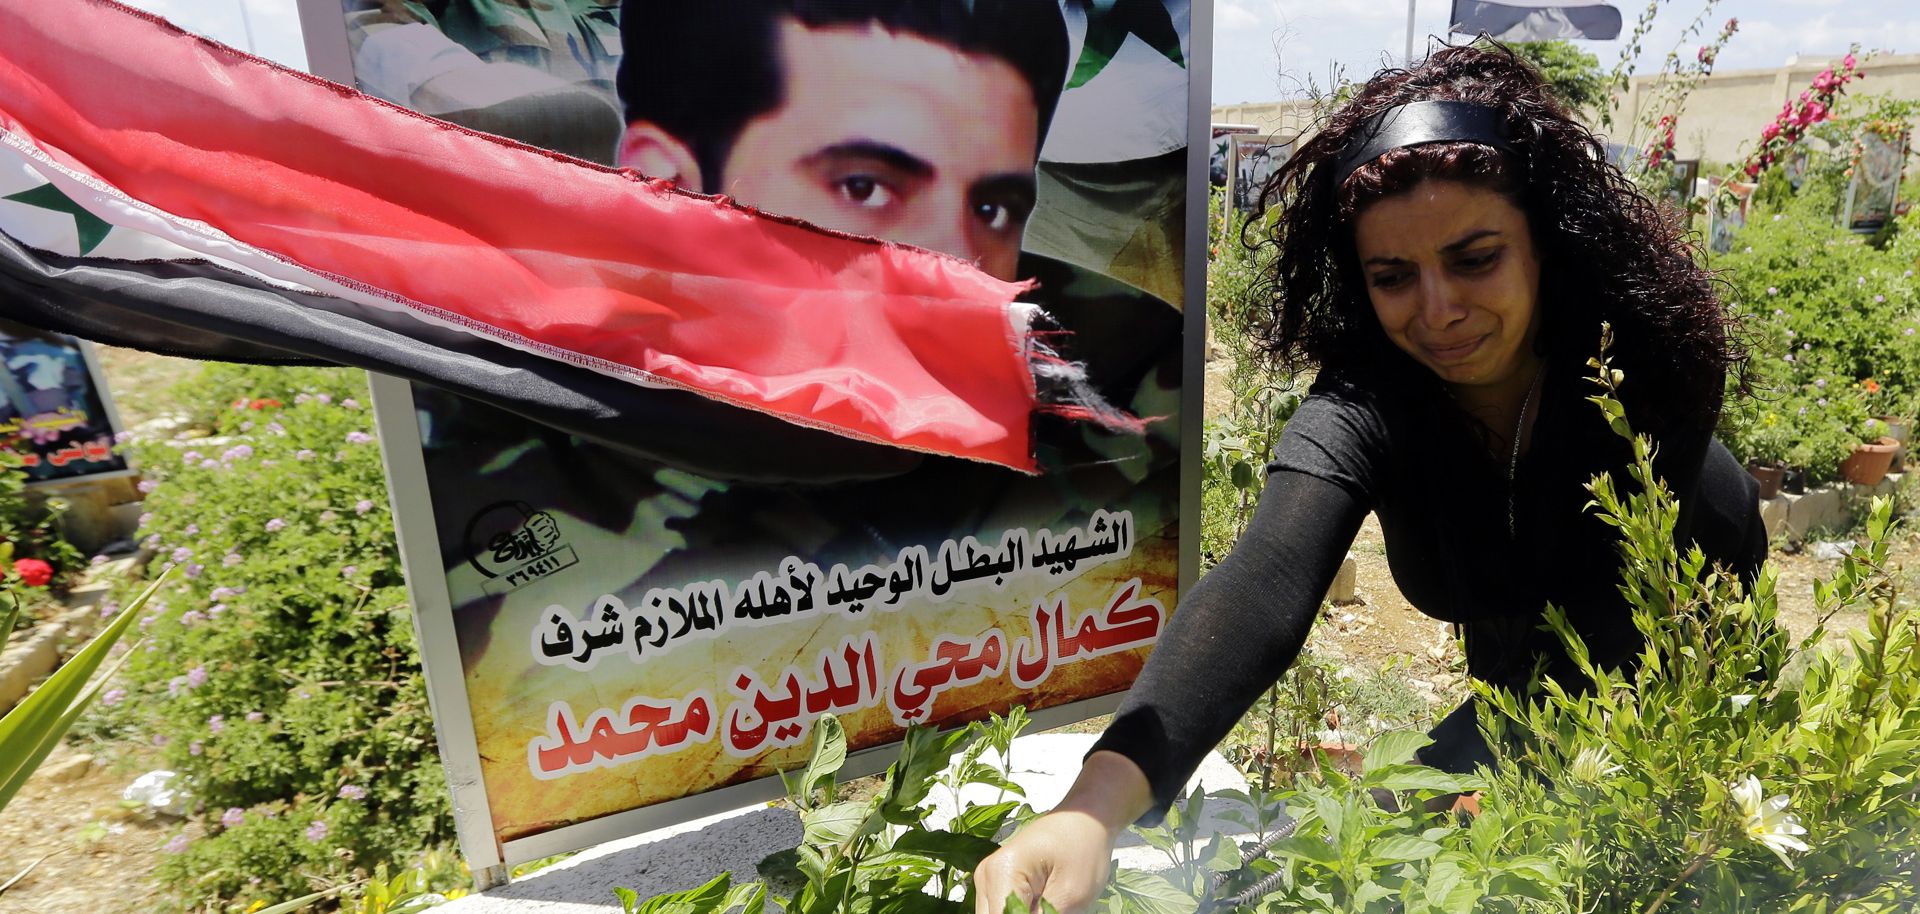 A Syrian woman cries at the grave of a relative killed in the Syrian conflict and buried at the Martyr's Cemetery in Tartus. (JOSEPH EID/AFP/Getty Images)